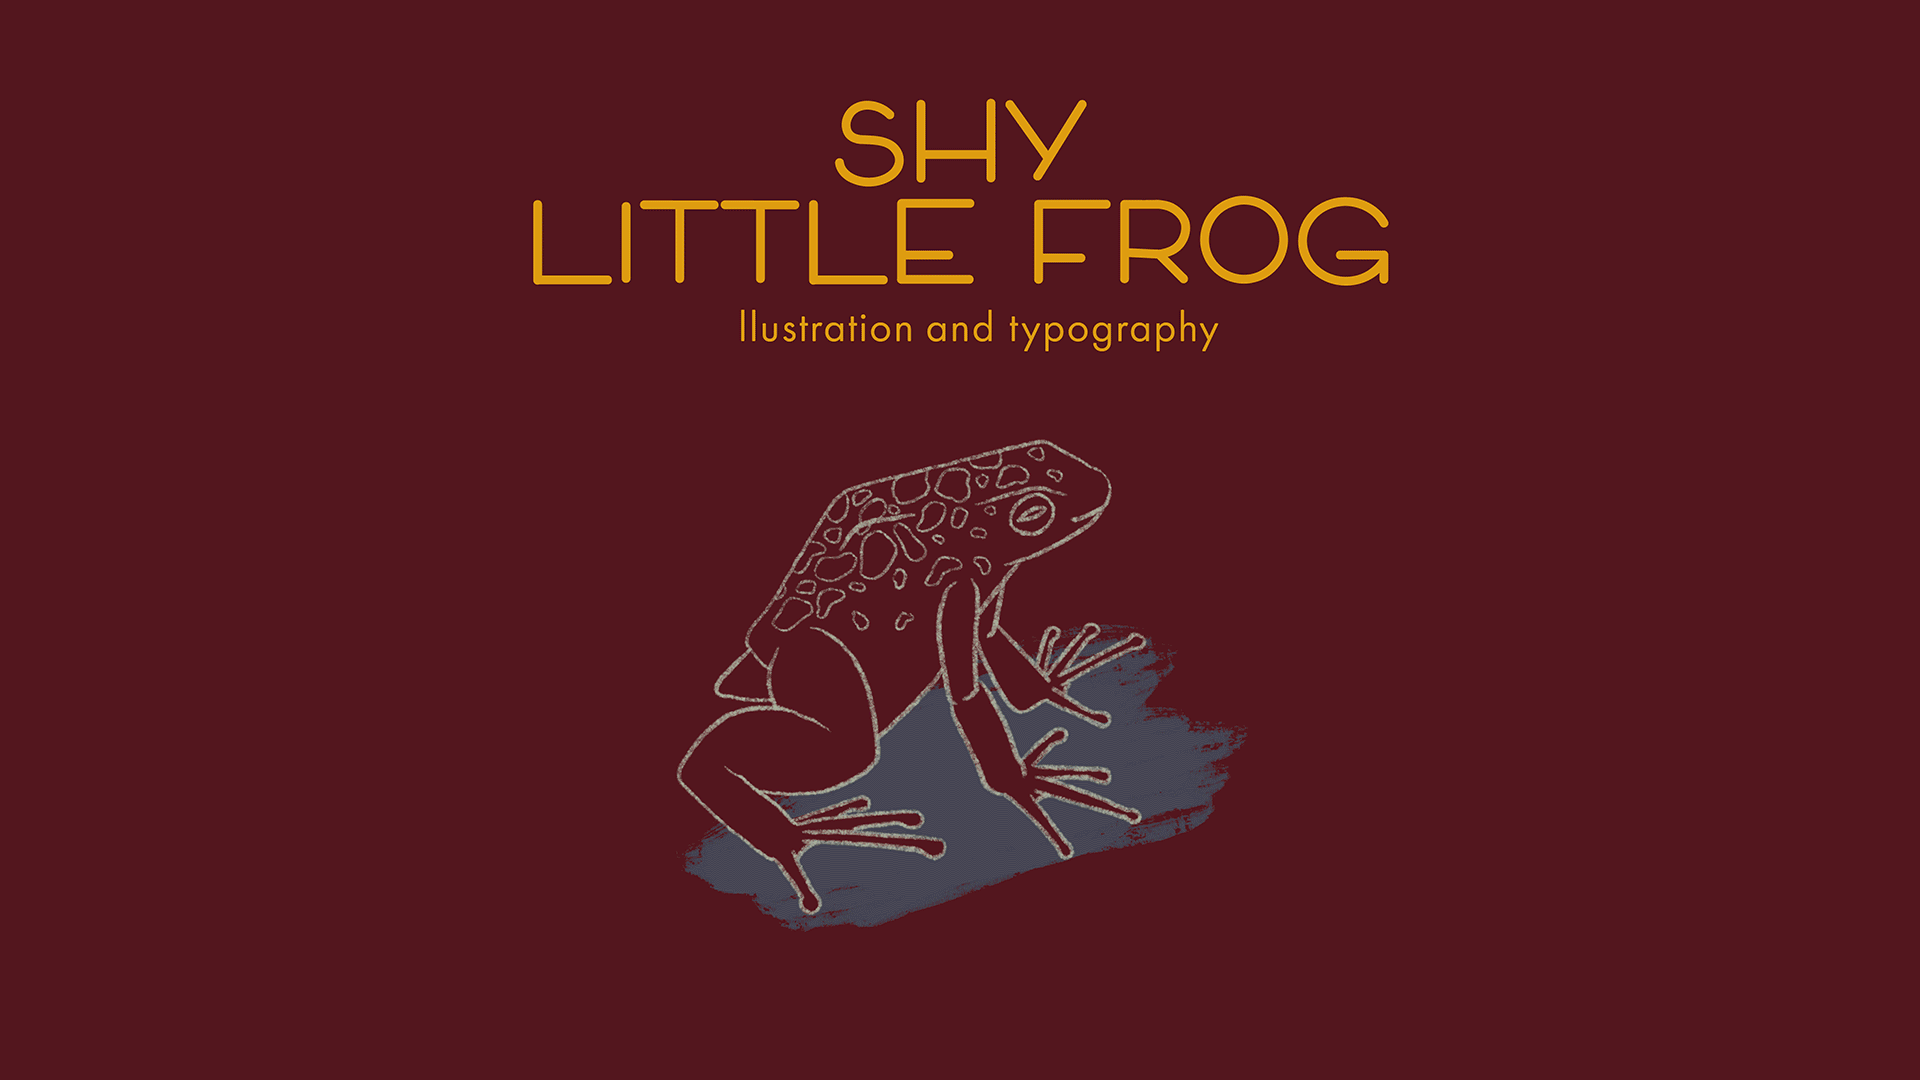 Shy Little Frog Illustration and Typography design graphic design illustration typography